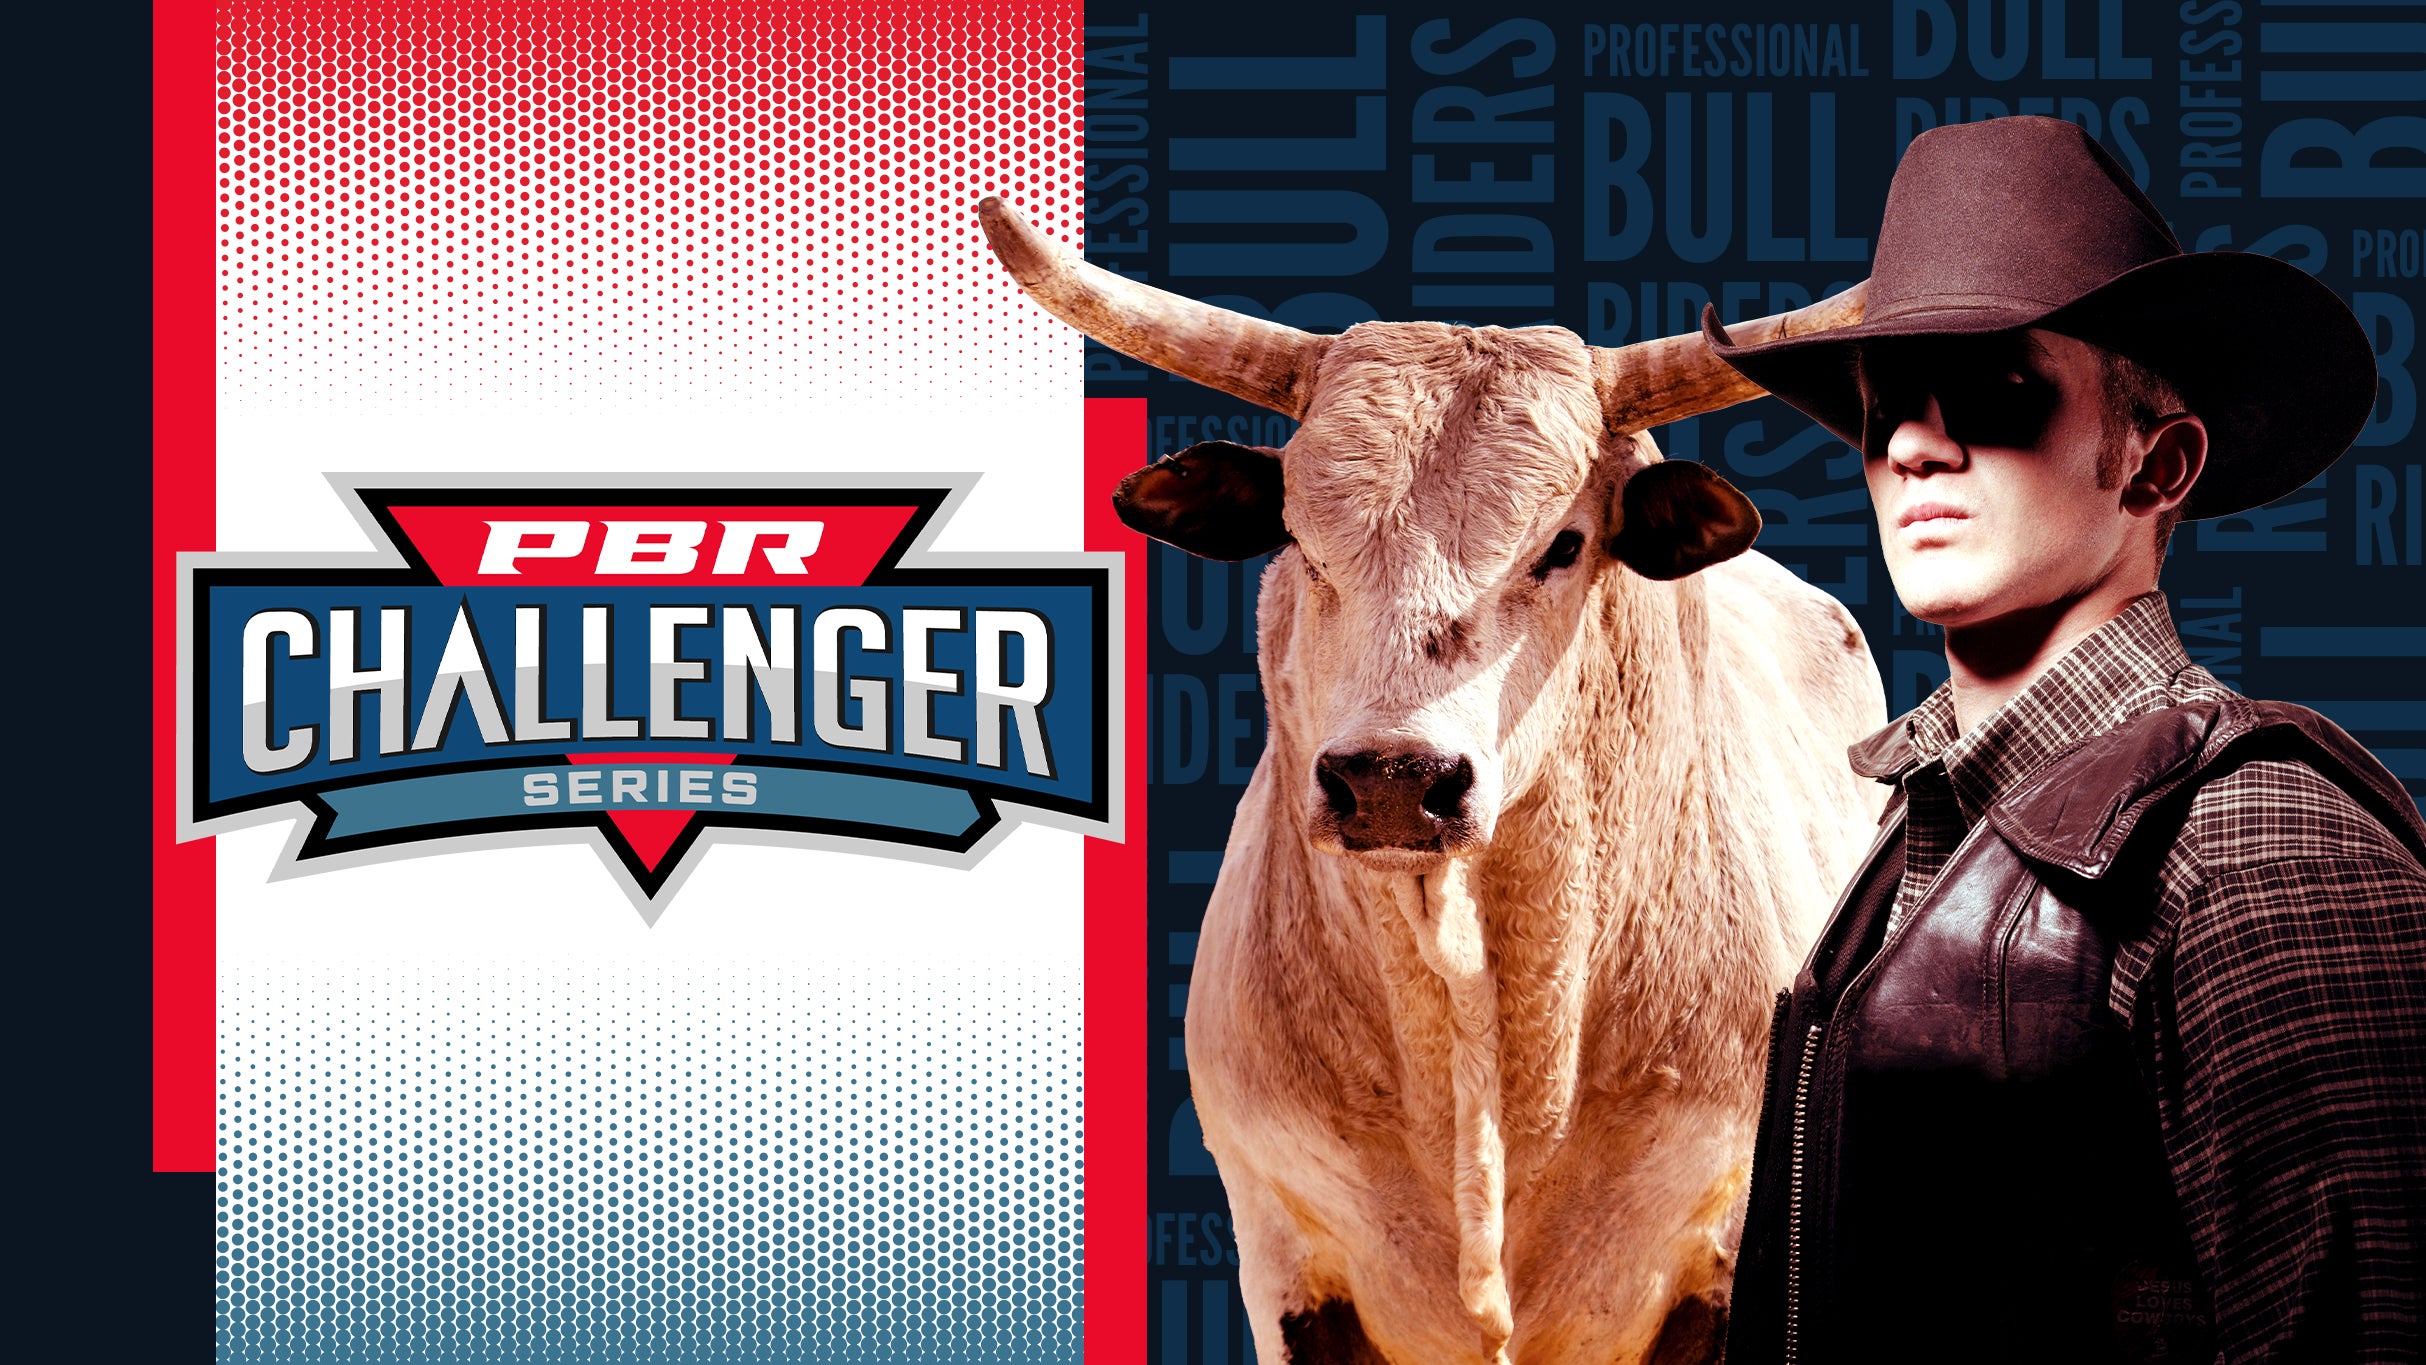 PBR 2 Day Combo Ticket in Kennewick promo photo for Combo presale offer code